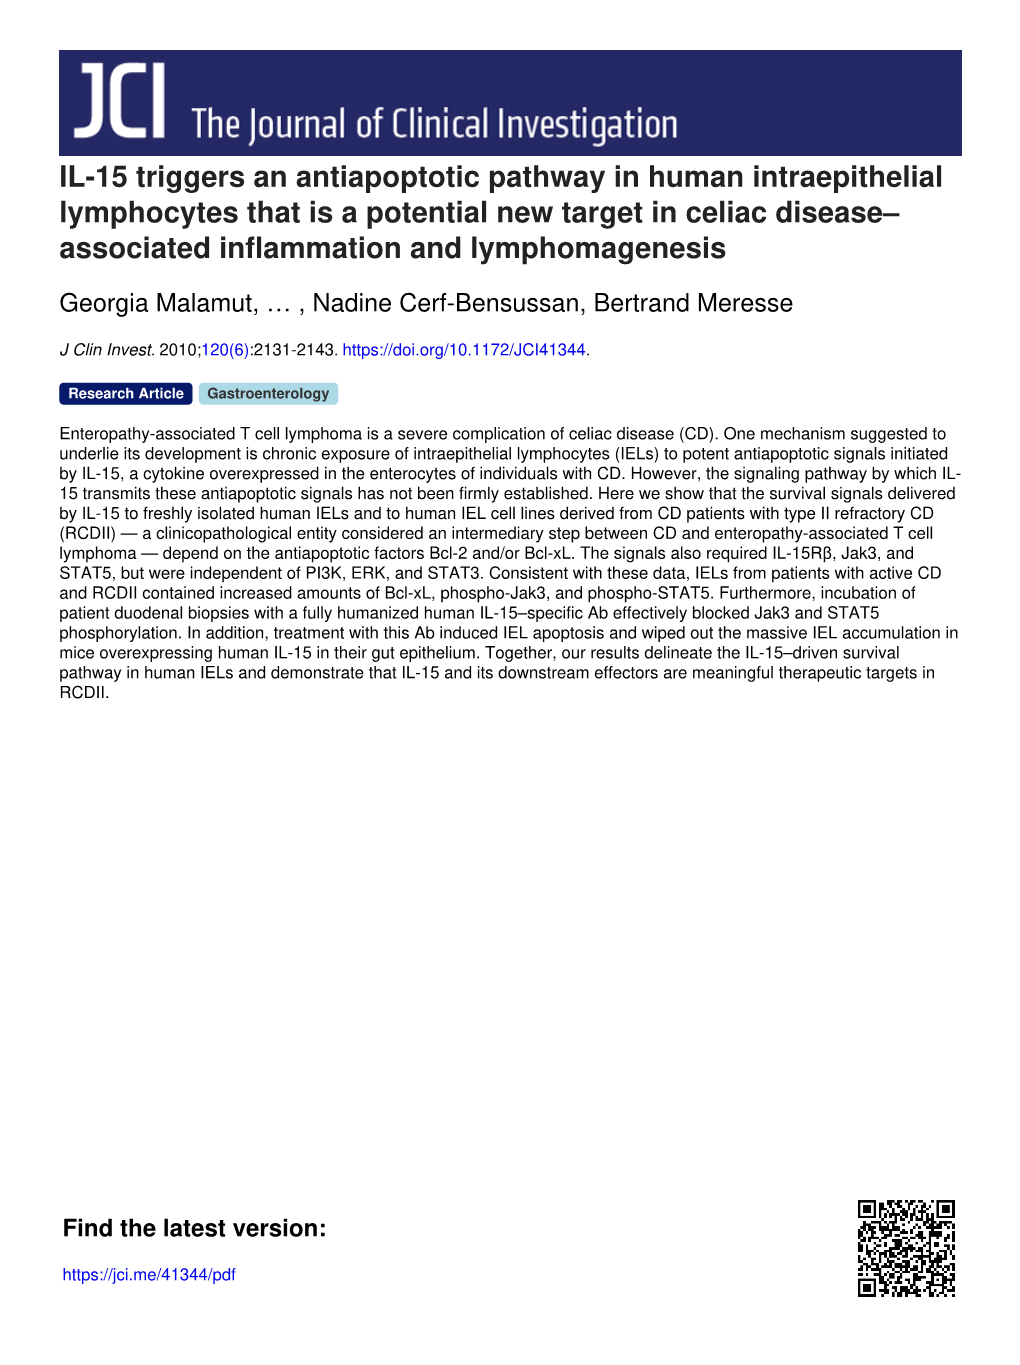 IL-15 Triggers an Antiapoptotic Pathway in Human Intraepithelial Lymphocytes That Is a Potential New Target in Celiac Disease